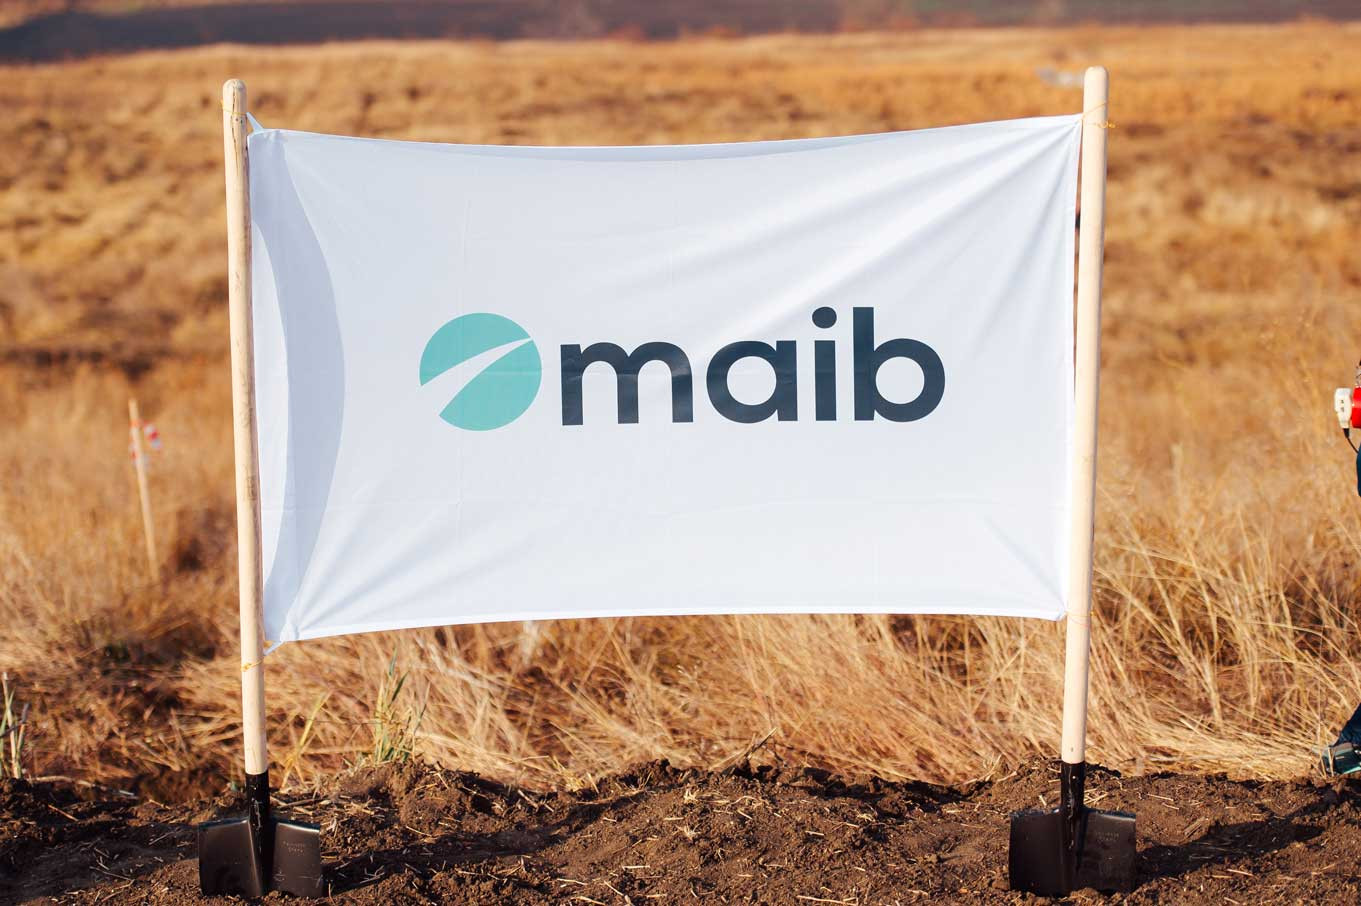 Planting the maib forest